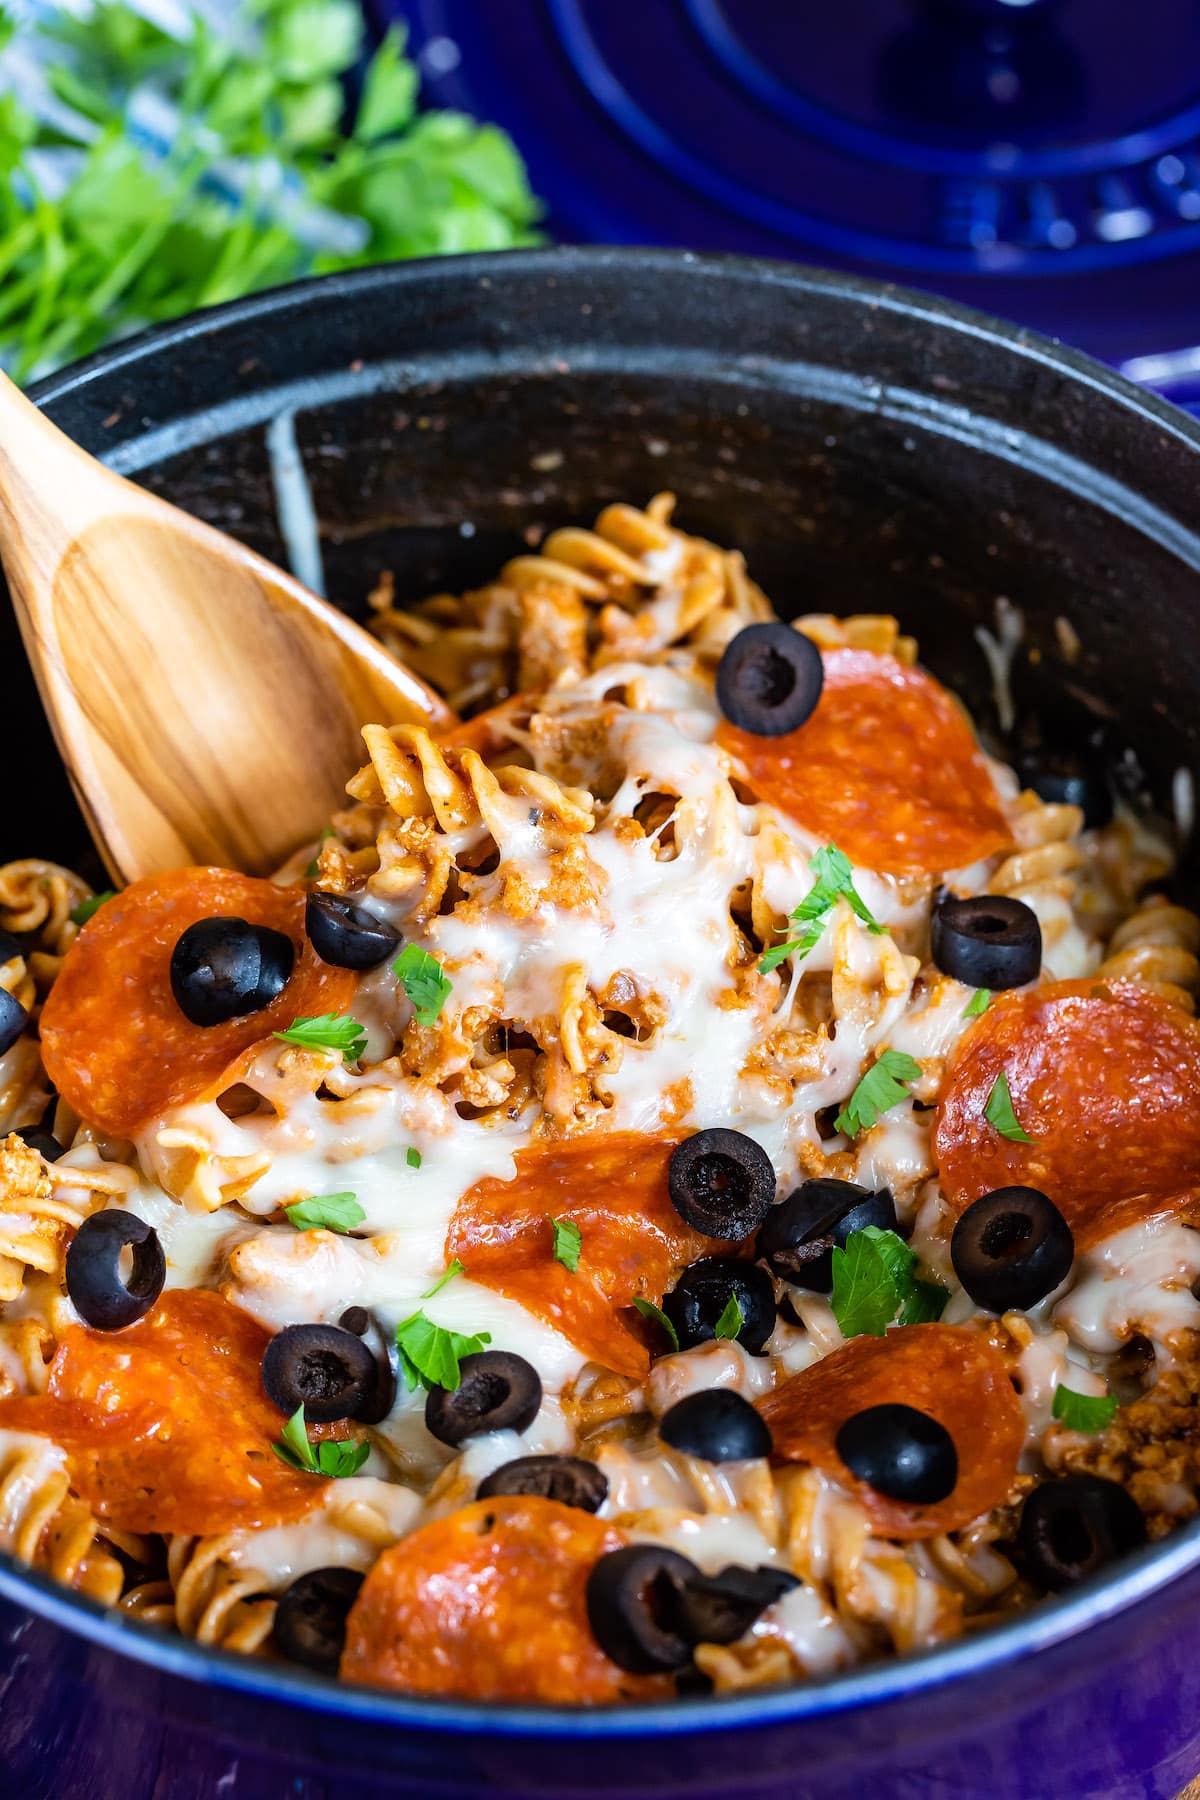 photo showing pasta in blue pot with pizza toppings